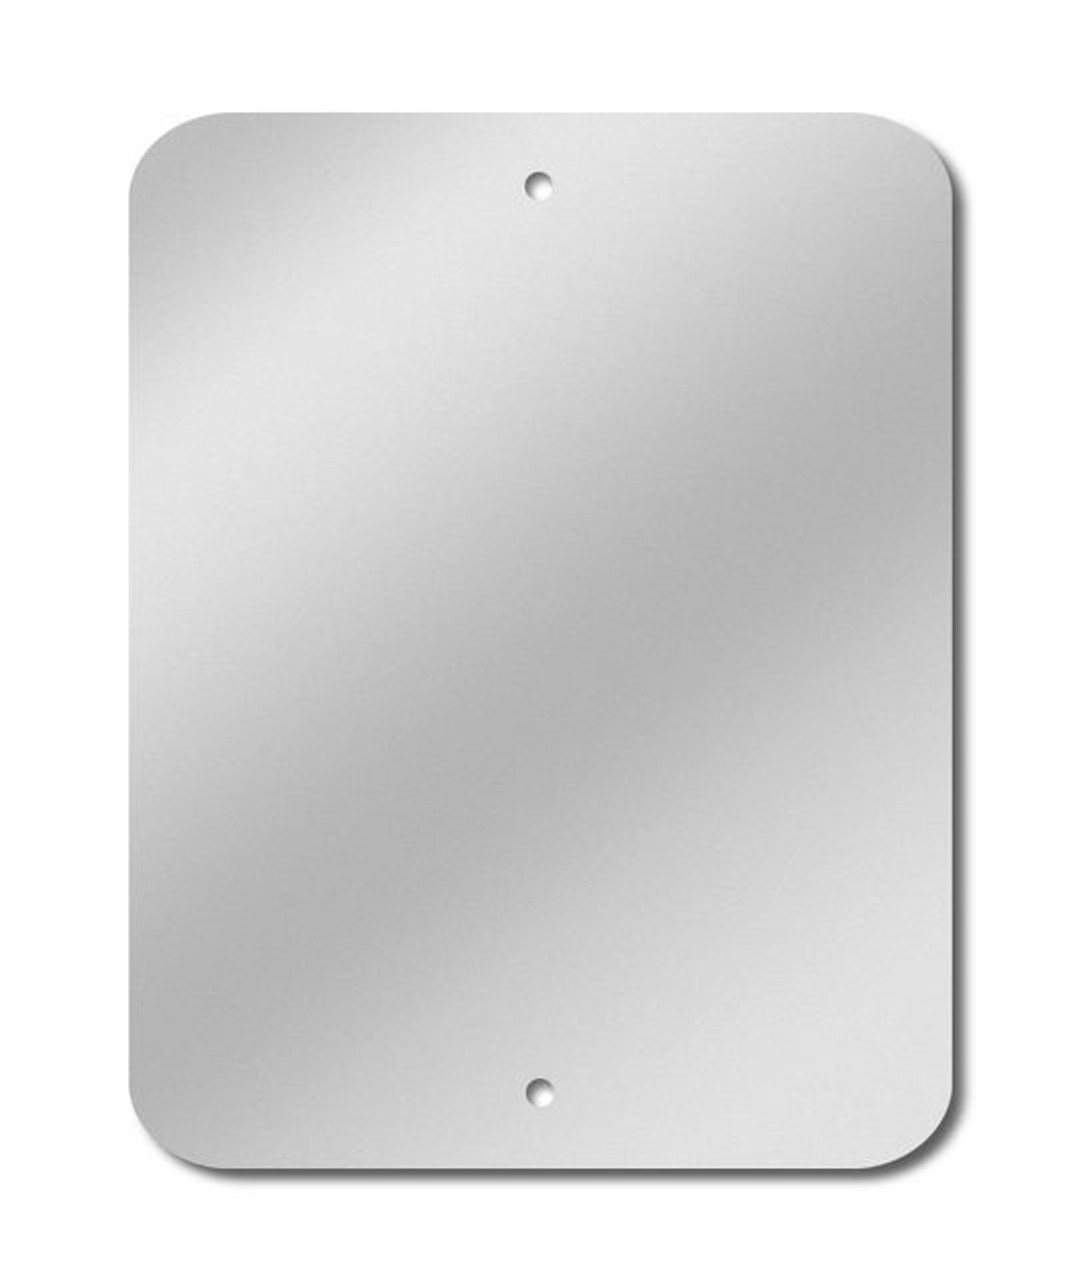 White Anodized Aluminum Sign Blanks for Street and Traffic Signs or Custom  Projects - Gauge .032 .040 .080 .063 - Size 18x24 or 12x18 – PARTSAPIENS